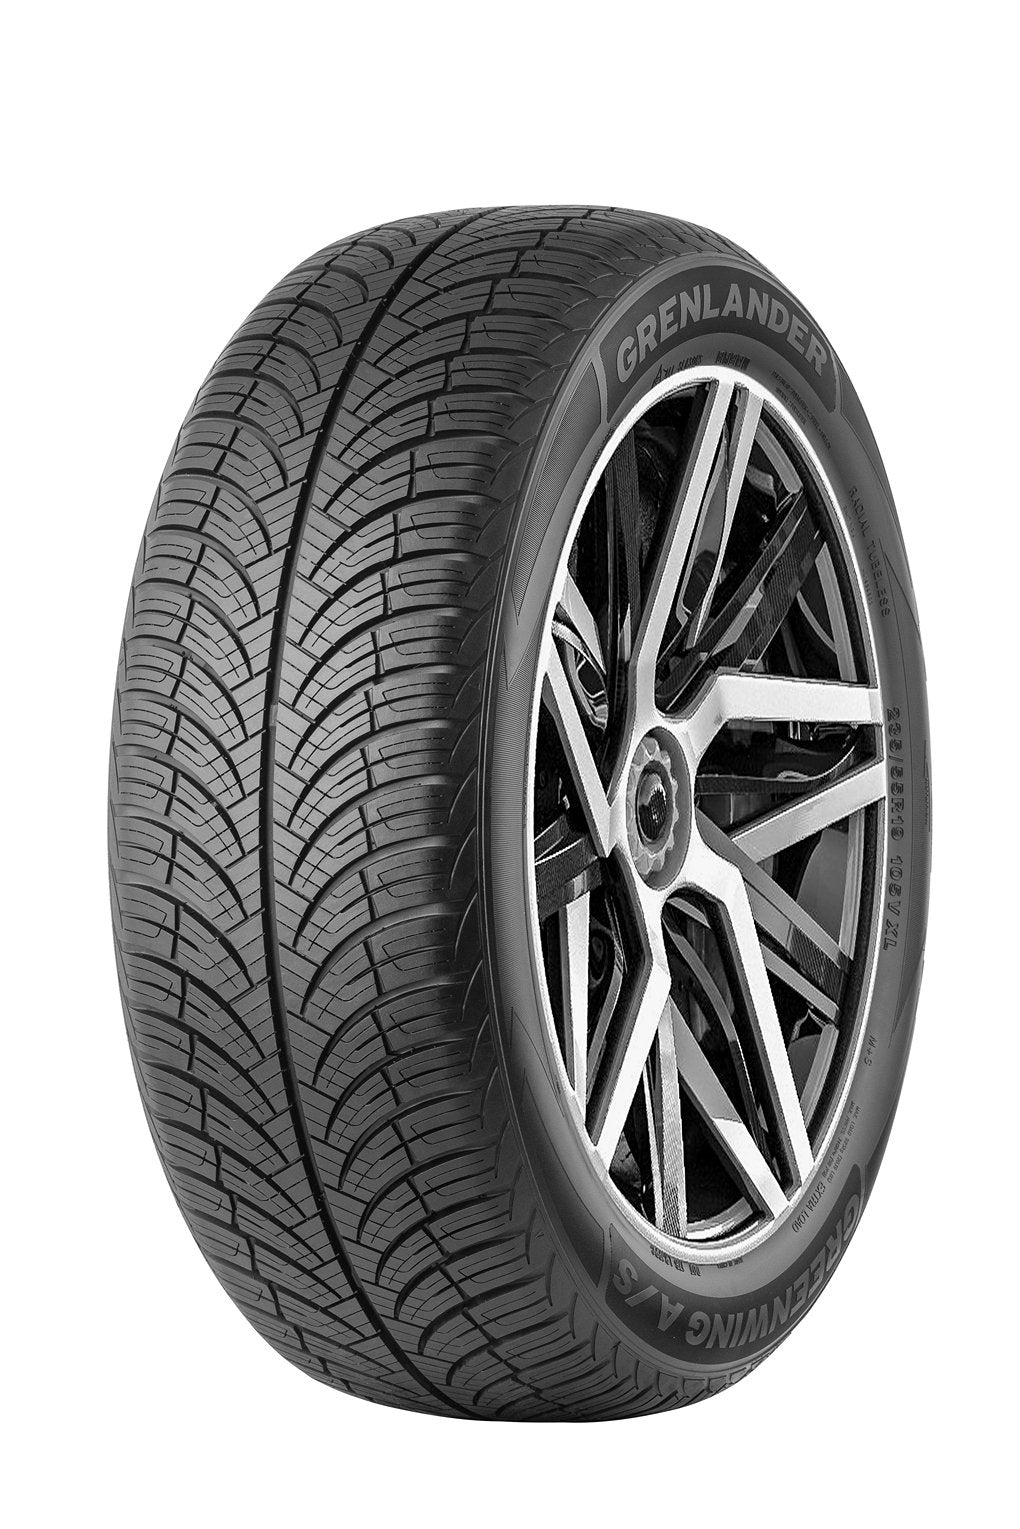 215/50R17 GRENLANDER GREENWING A/S ALL WEATHER - Toee Tire